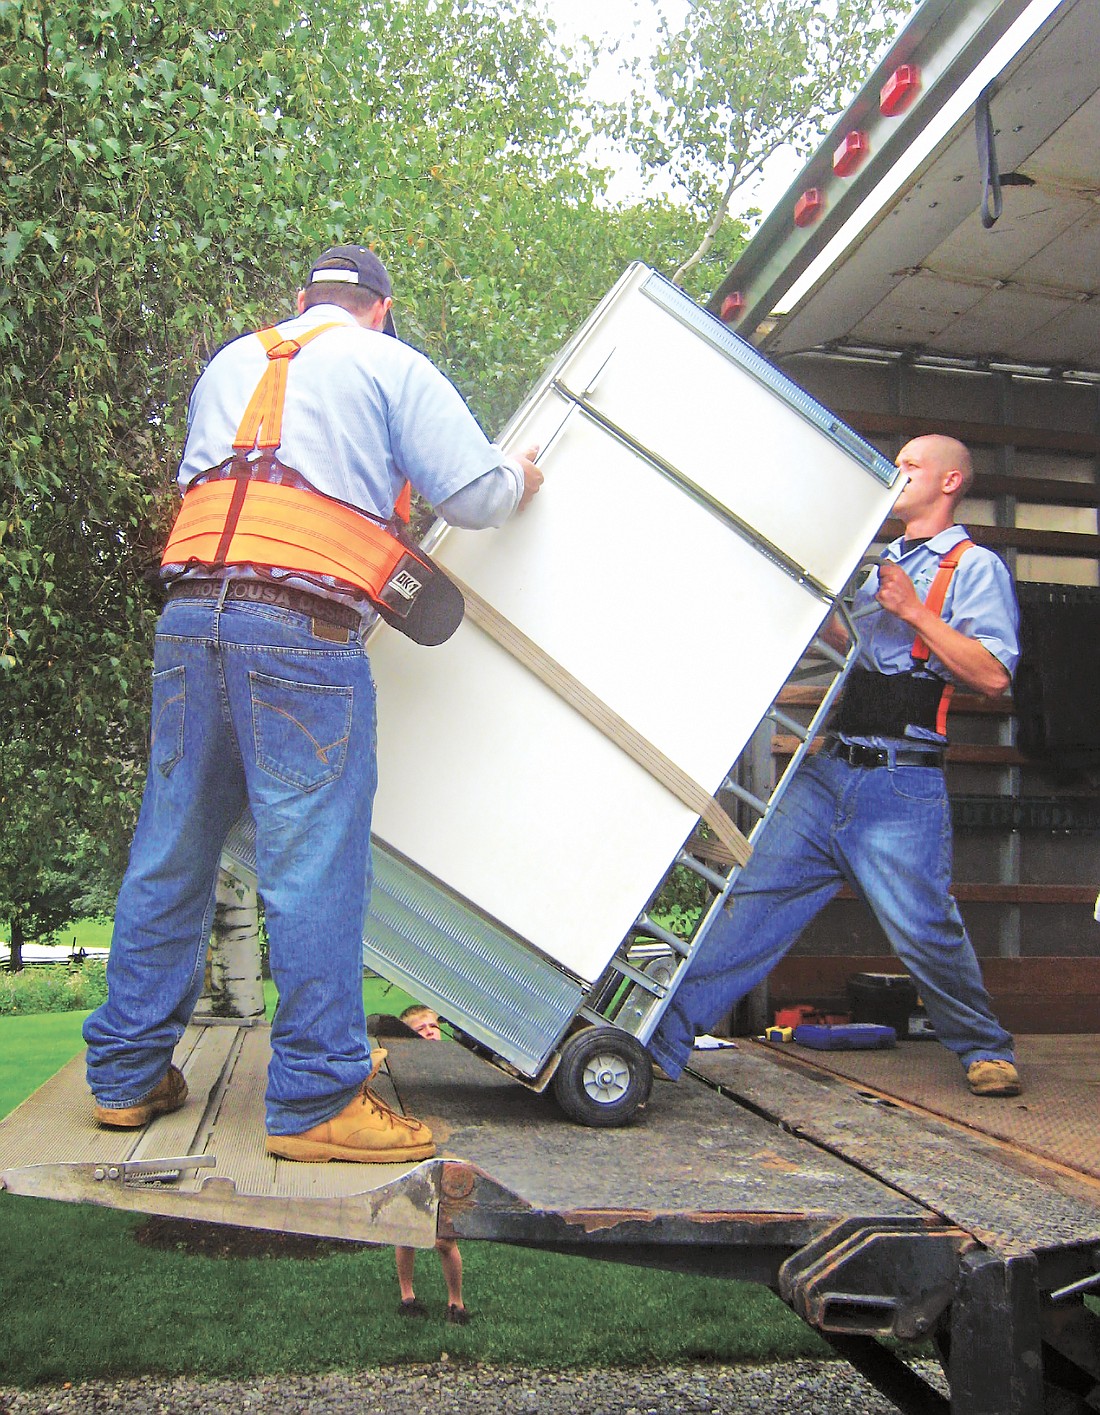 Seattle City Light offers a rebate program for new, energy efficient refrigerators, and will also haul away for free old refrigerators and freezers.